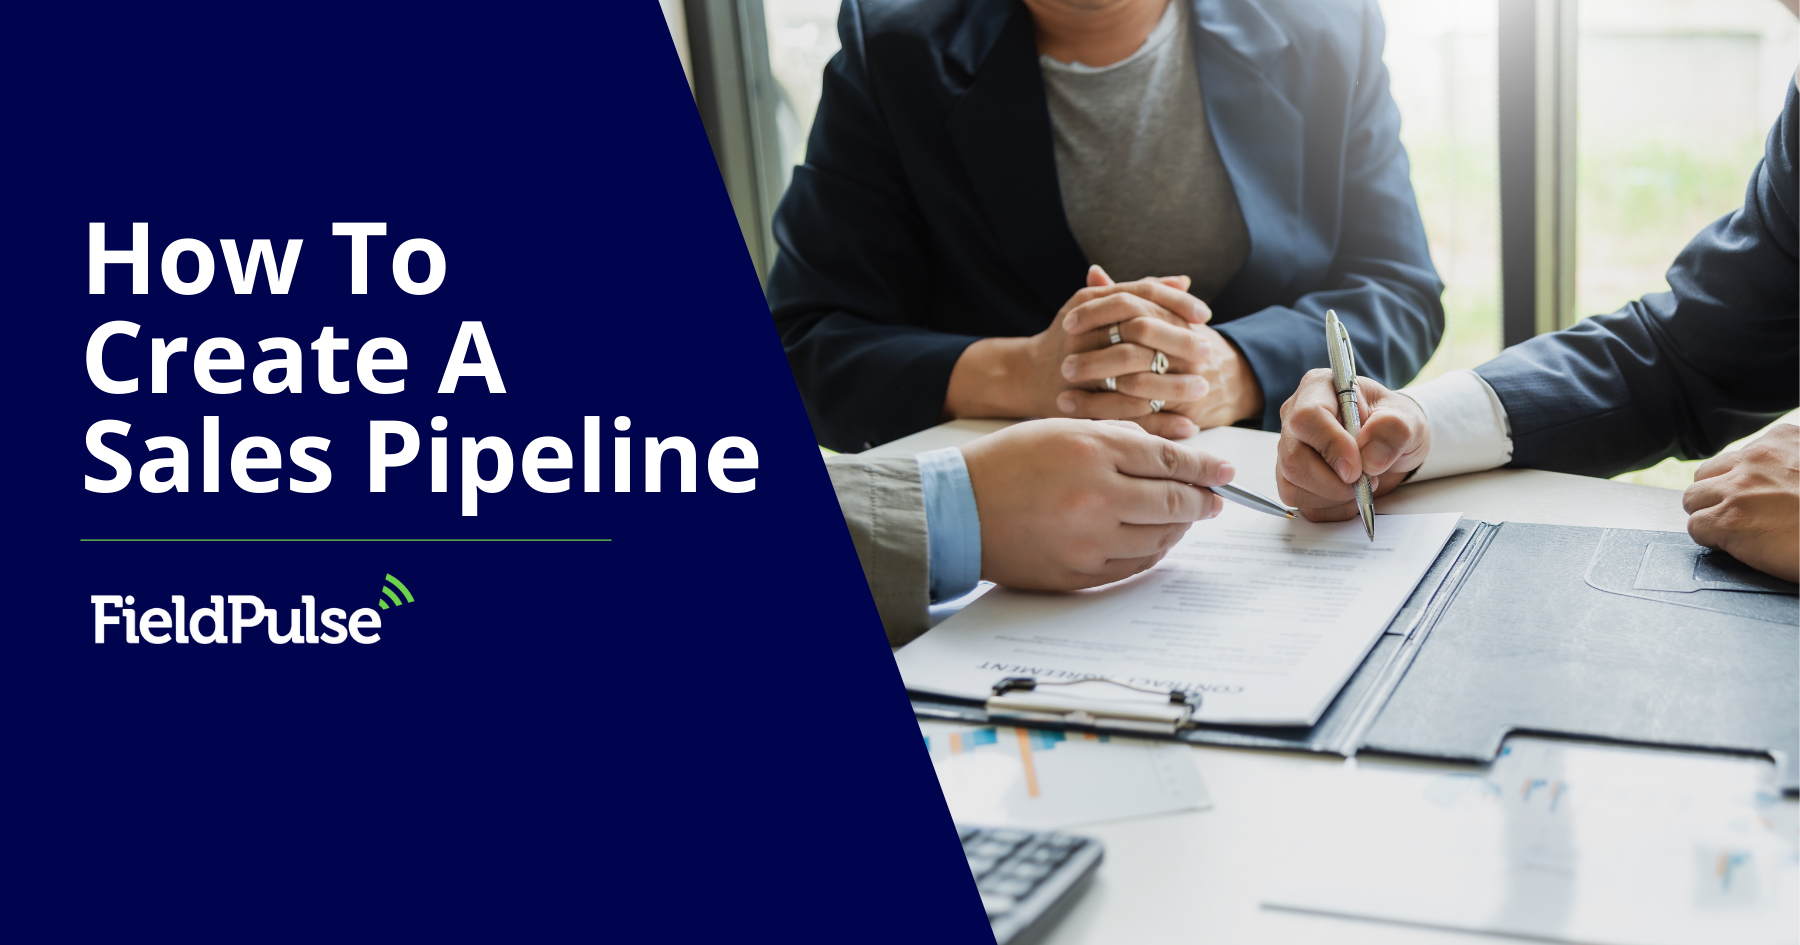 How To Create A Sales Pipeline